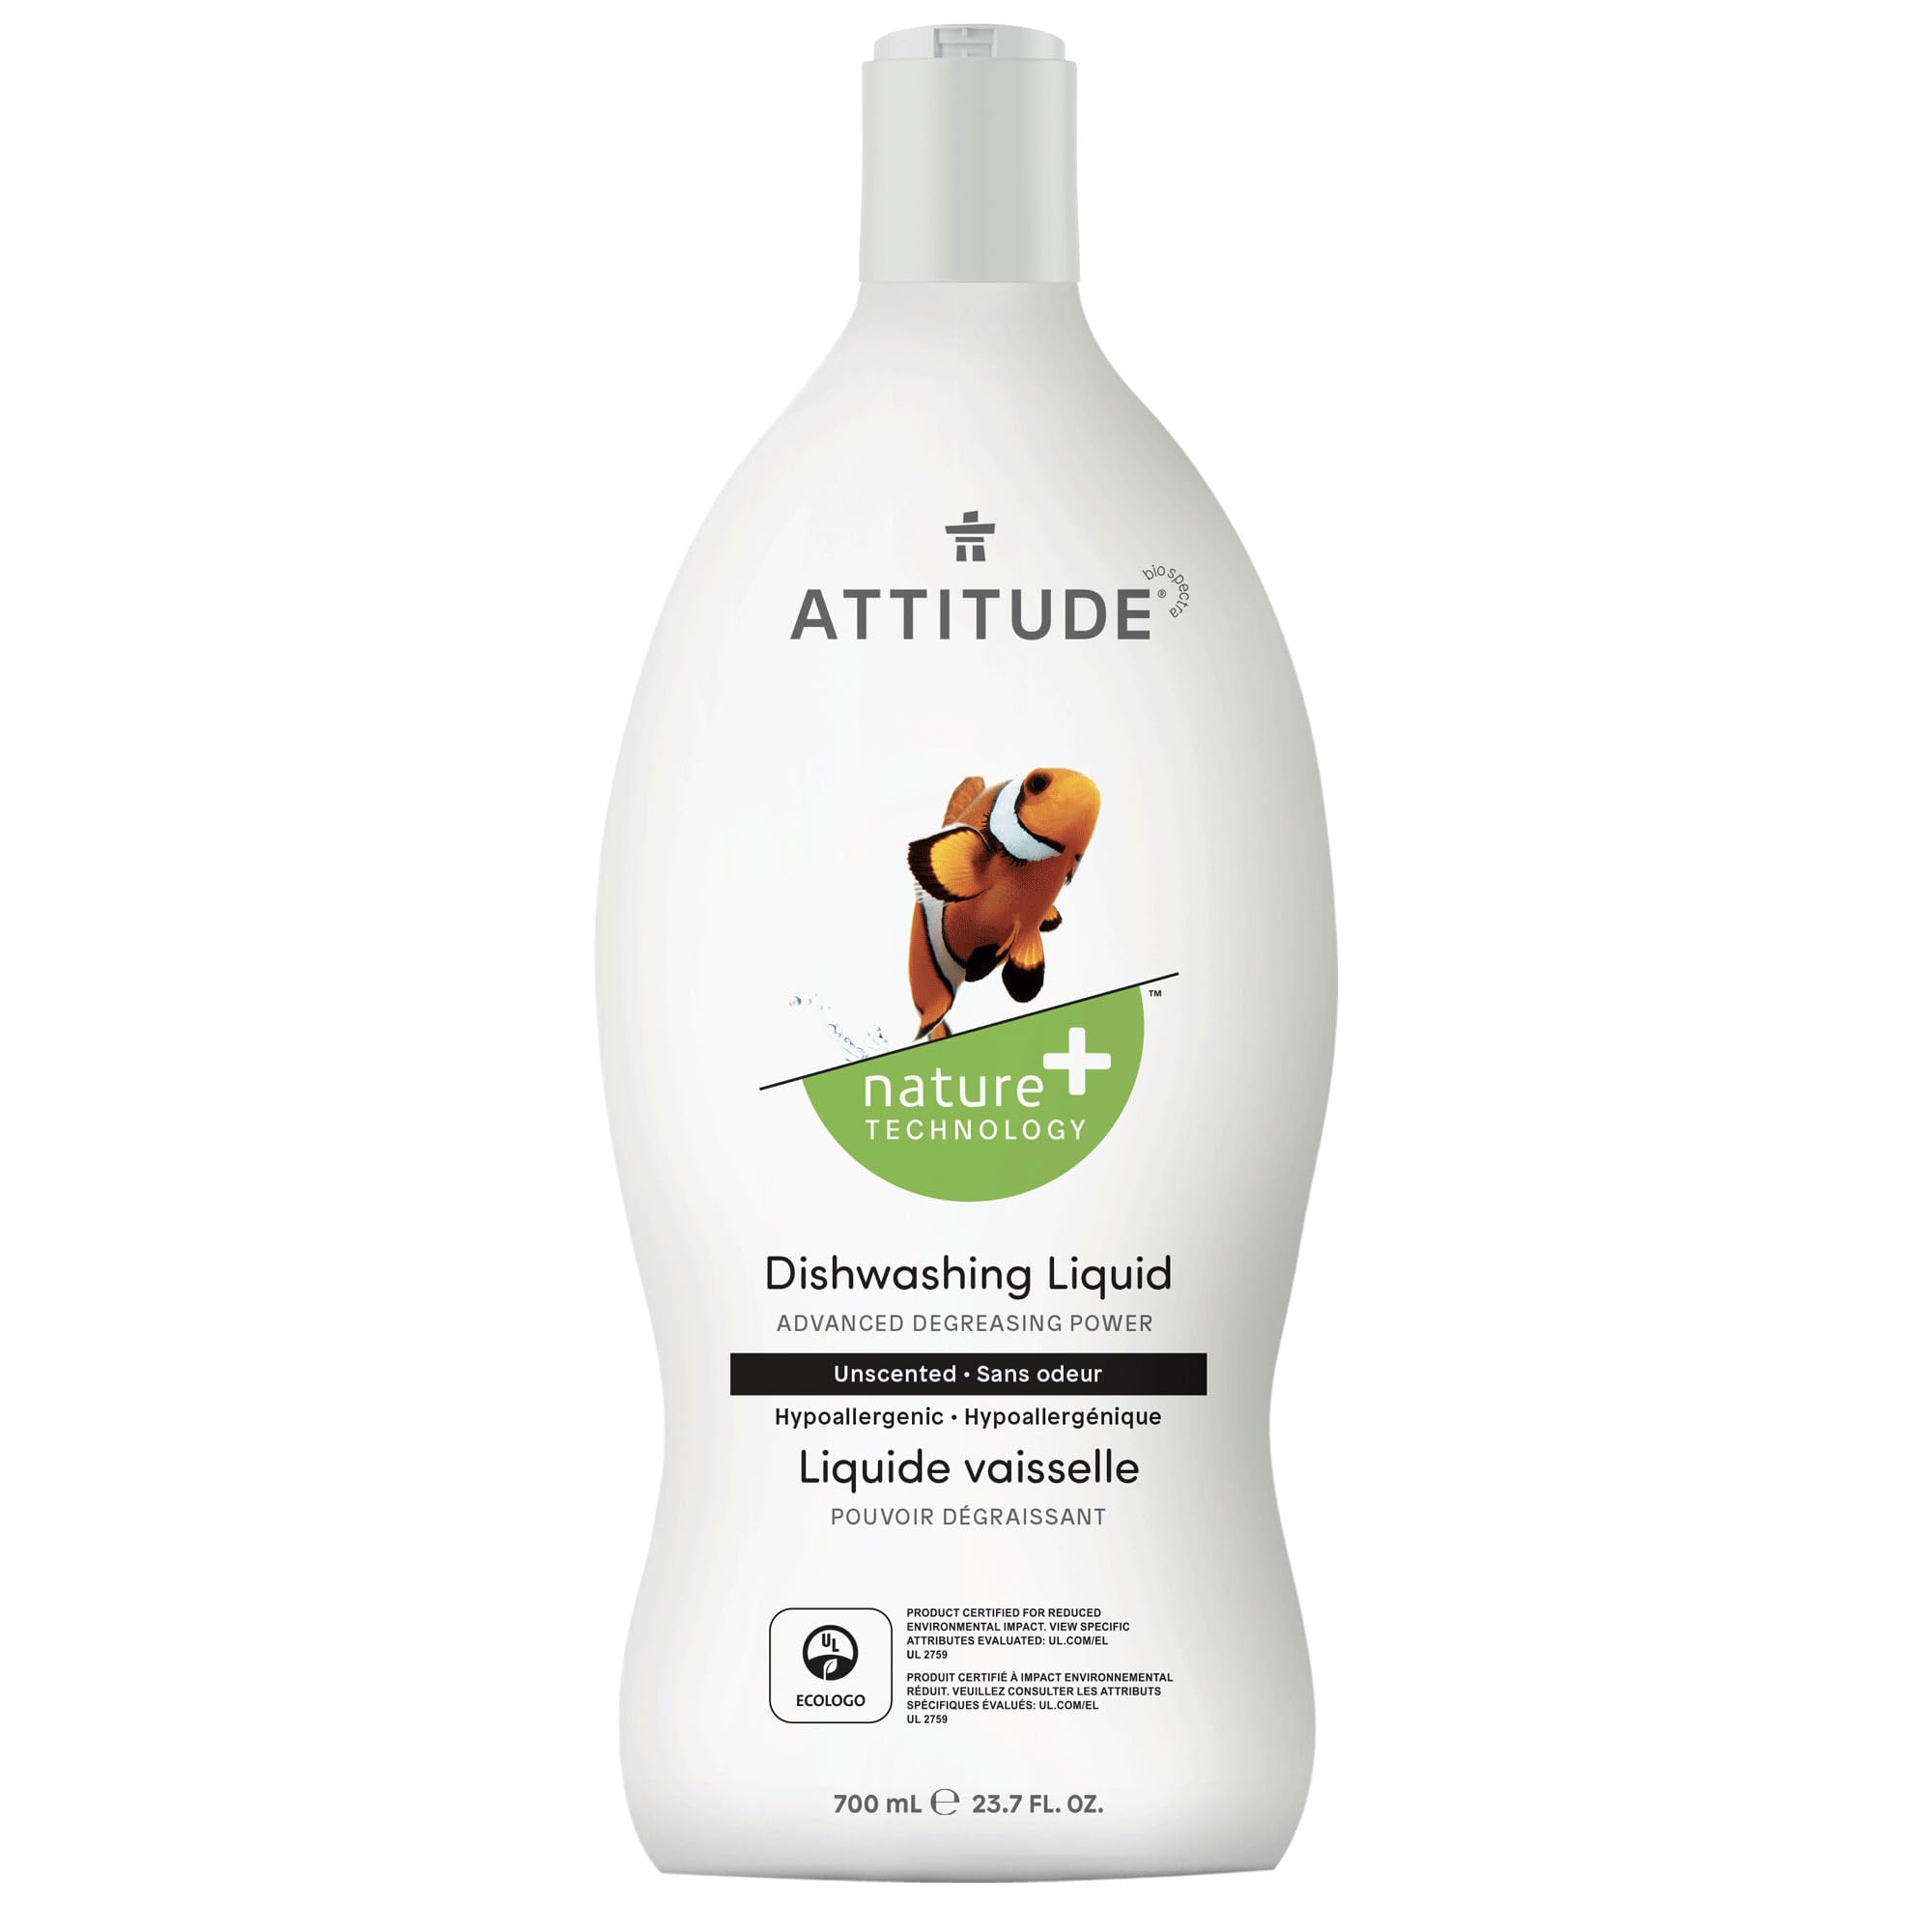 ATTITUDE Liquid Dish Detergent, Hypoallergenic Plant- and Mineral-Based Ingredients, Effective Dishwashing Soap Formula, Vegan and Cruelty-free, Unscented, 23.7 Fl Oz